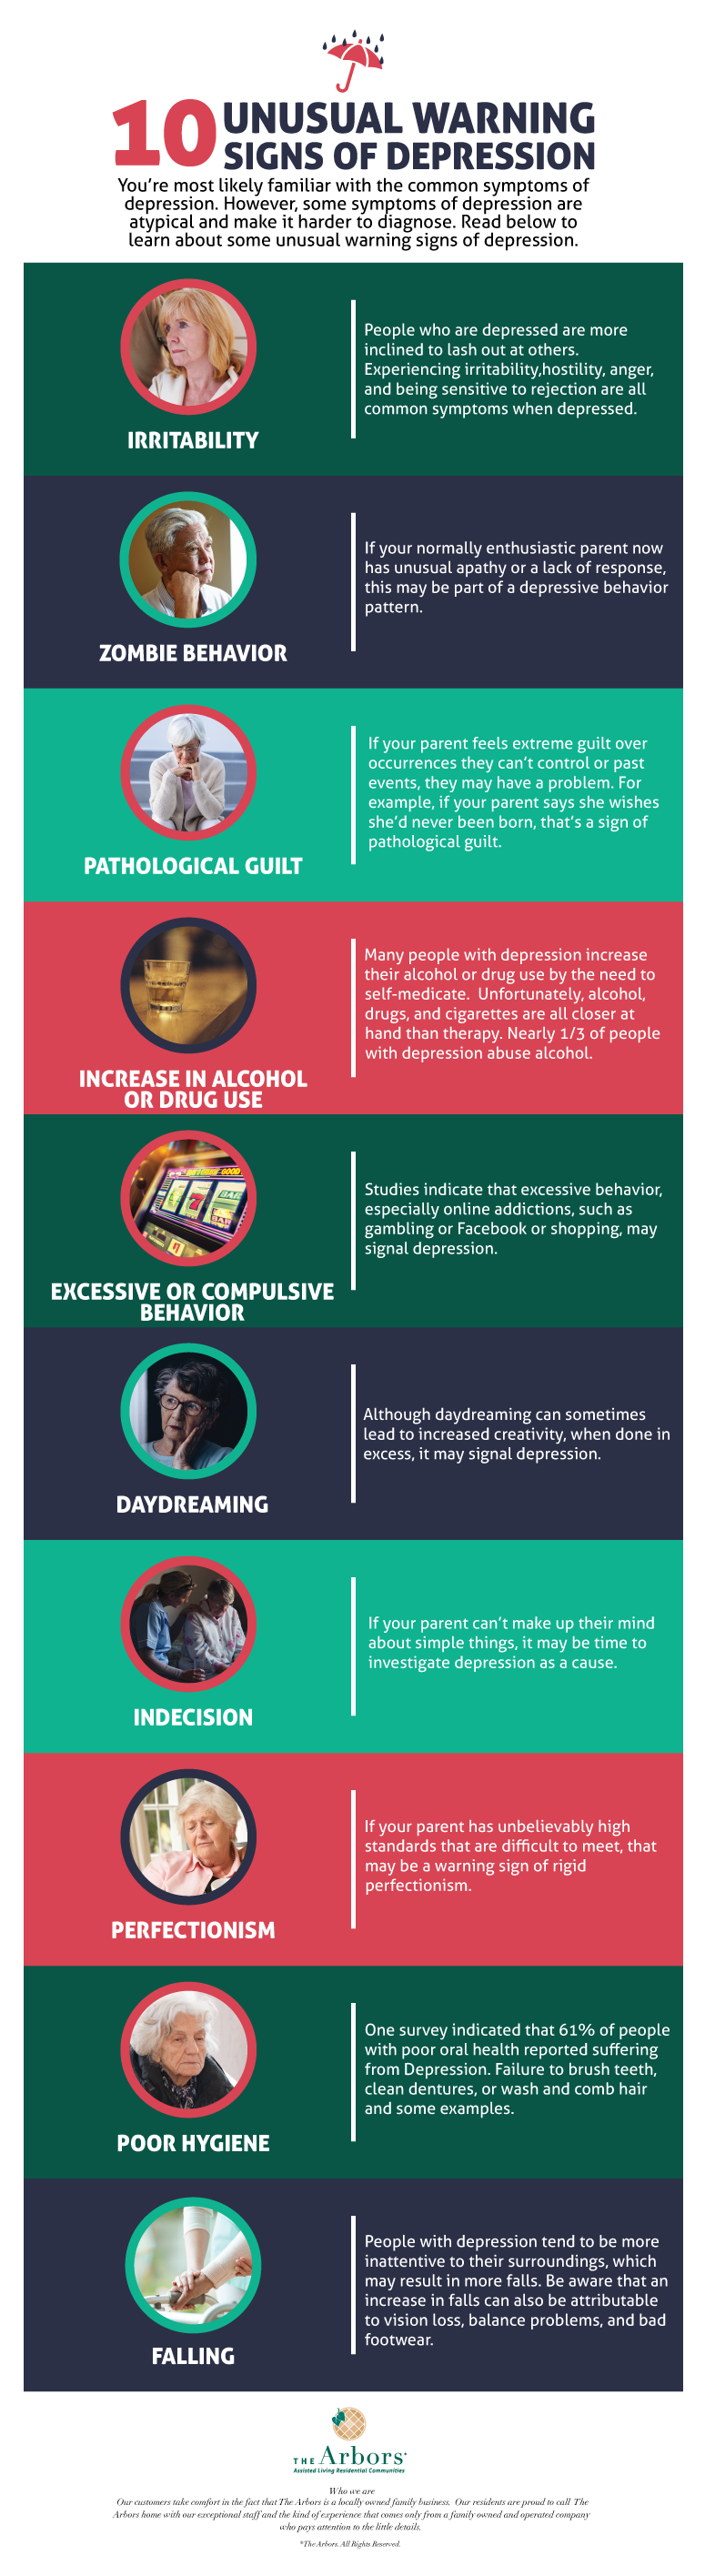 Infographic : 10 Unusual Warning Signs of Depression